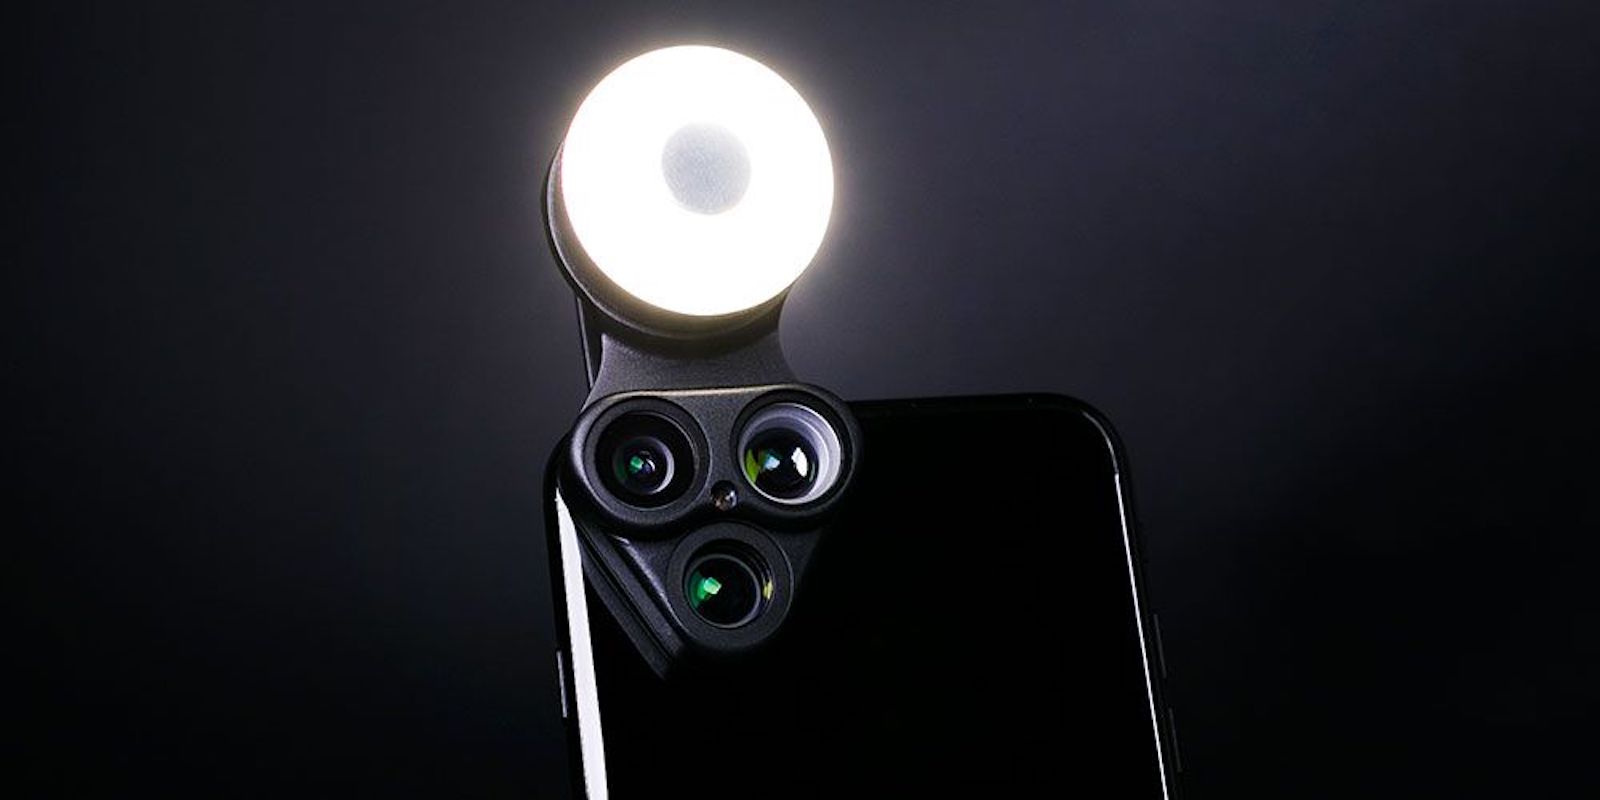 Instantly enhance the photo capabilities of your iPhone with three lenses, an LED flash, and more.